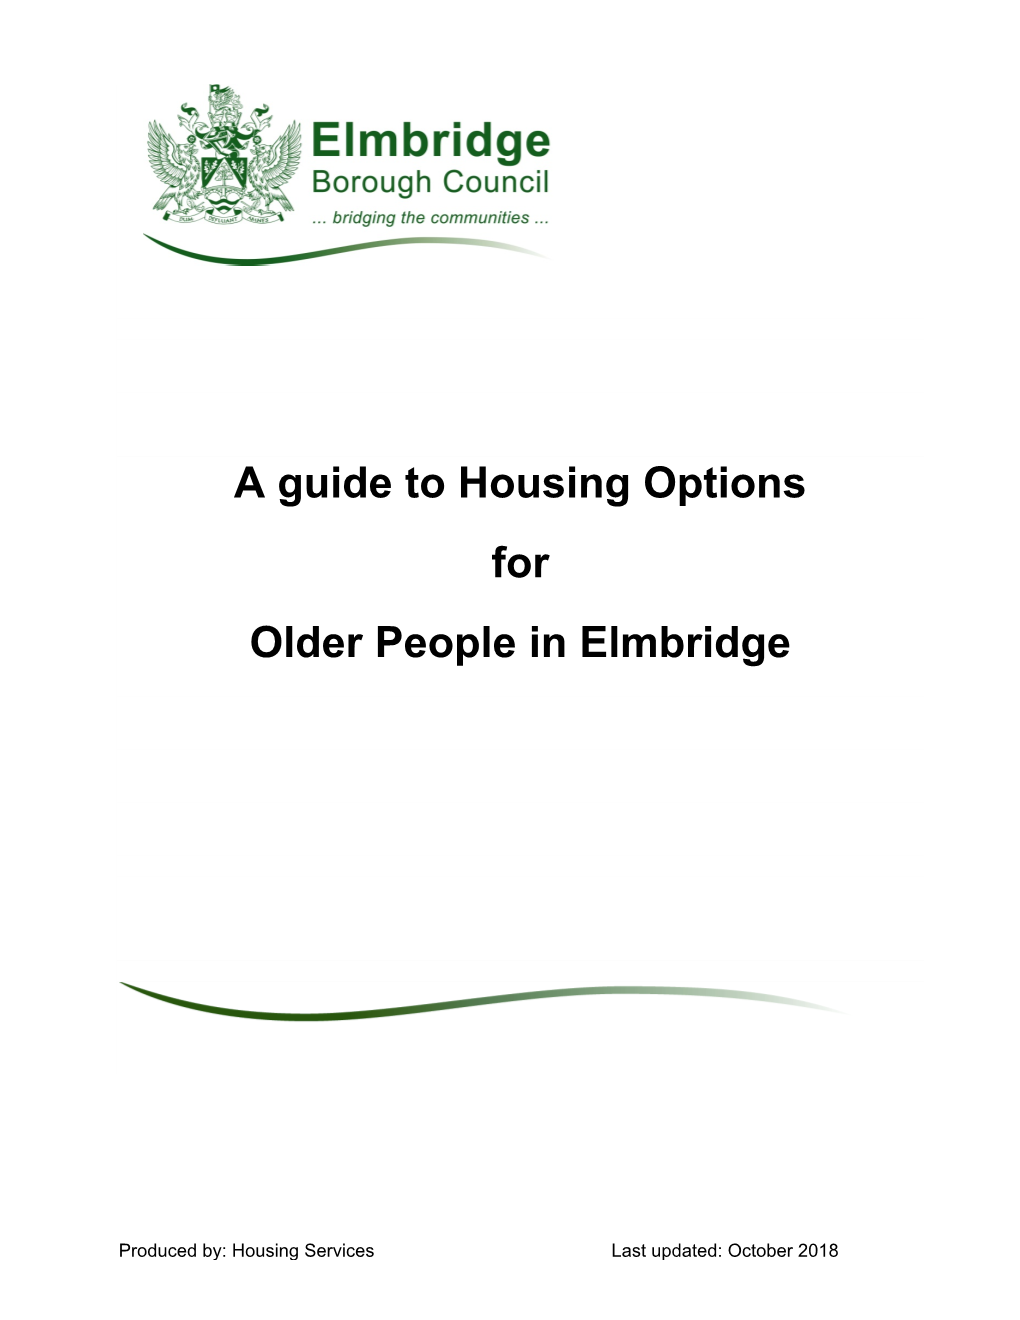 A Guide to Housing Options for Older People in Elmbridge